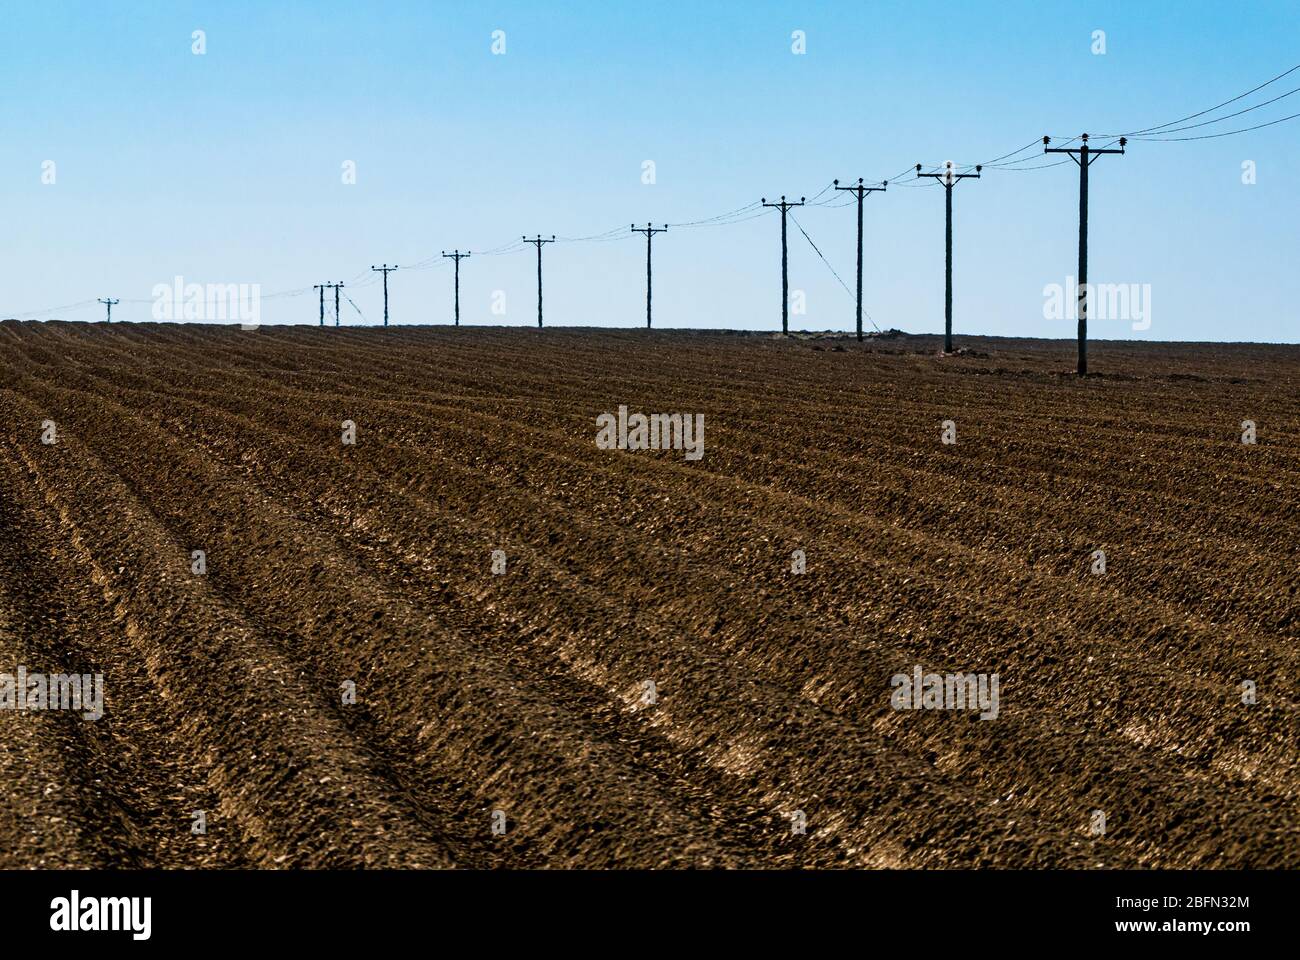 Atmospheric view of ploughed field with ridges and electricity cable poles leading away into the distance, East Lothian, Scotland, UK Stock Photo